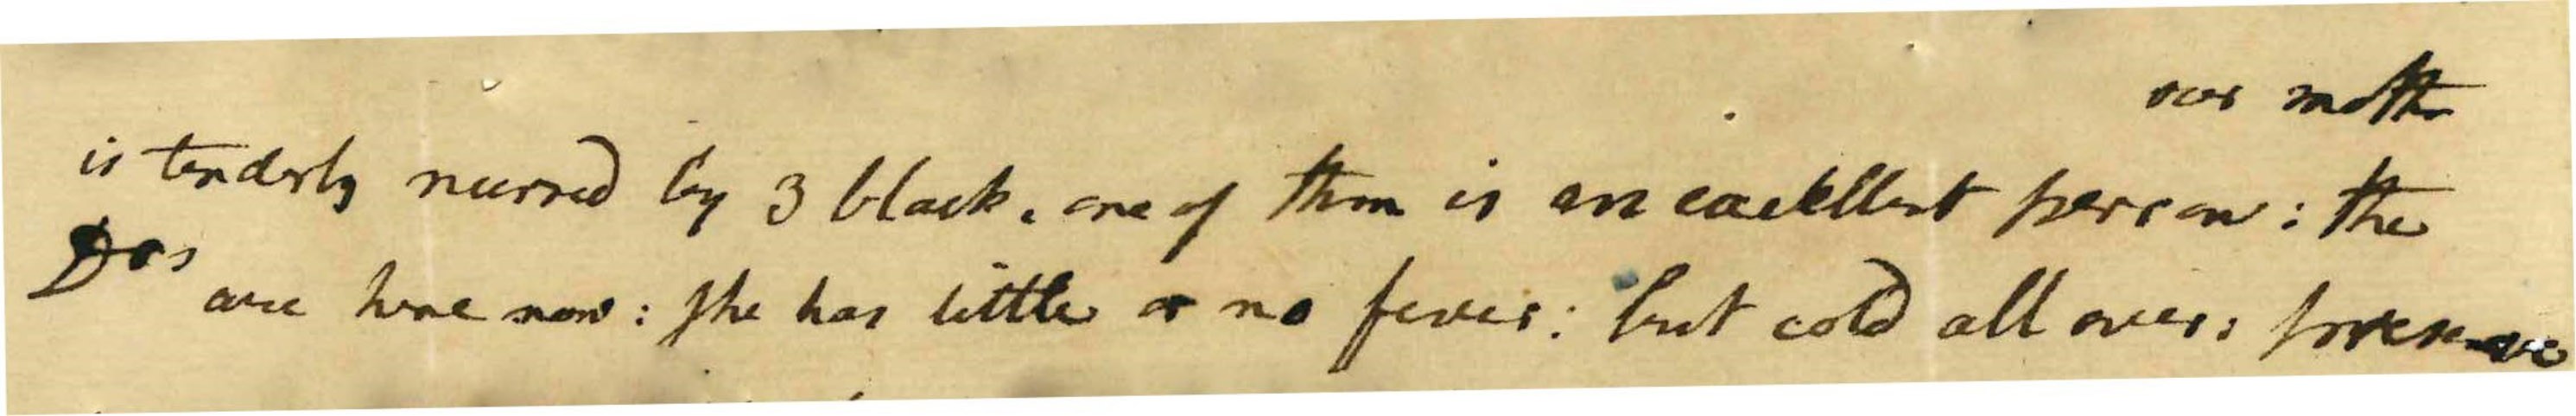 Snippet of letter